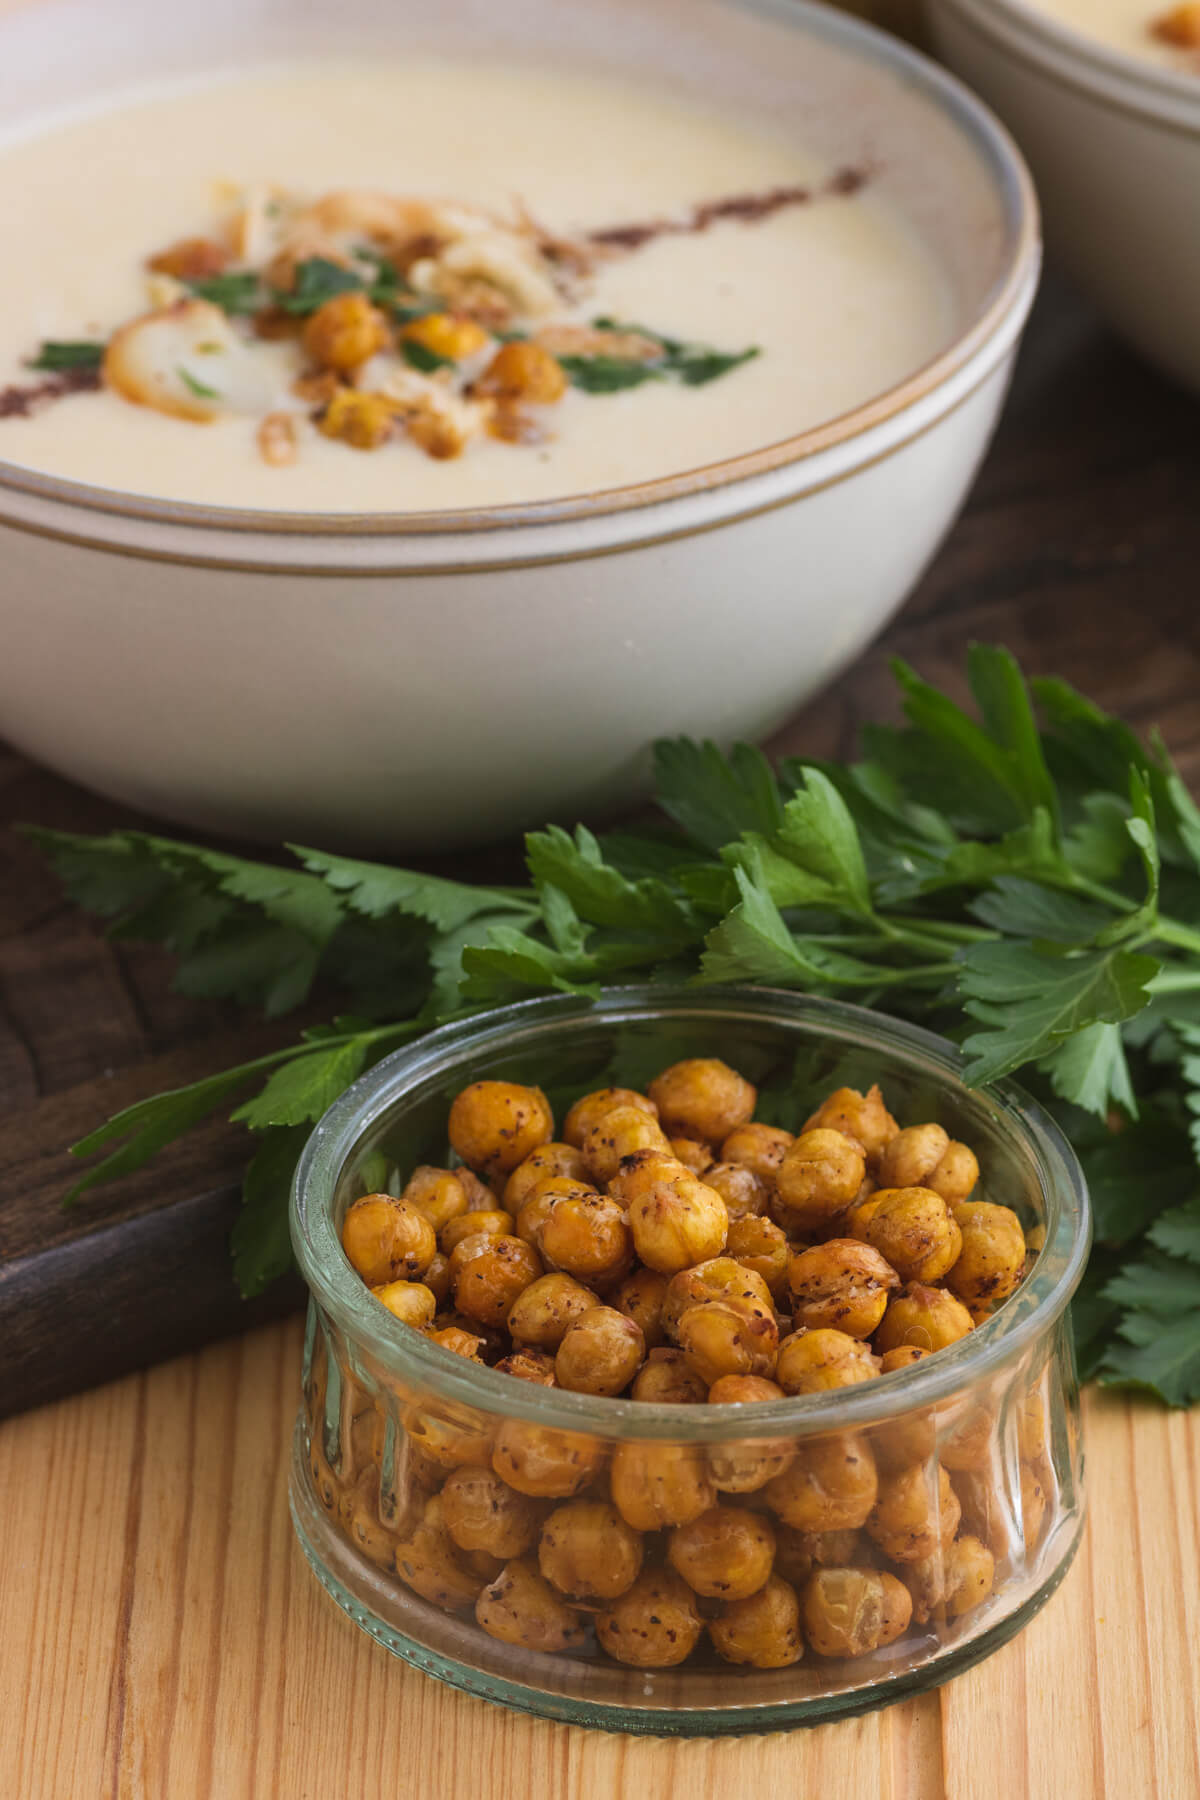 A bowl of golden roasted chickpeas in front of a bowl of chickpea soup.